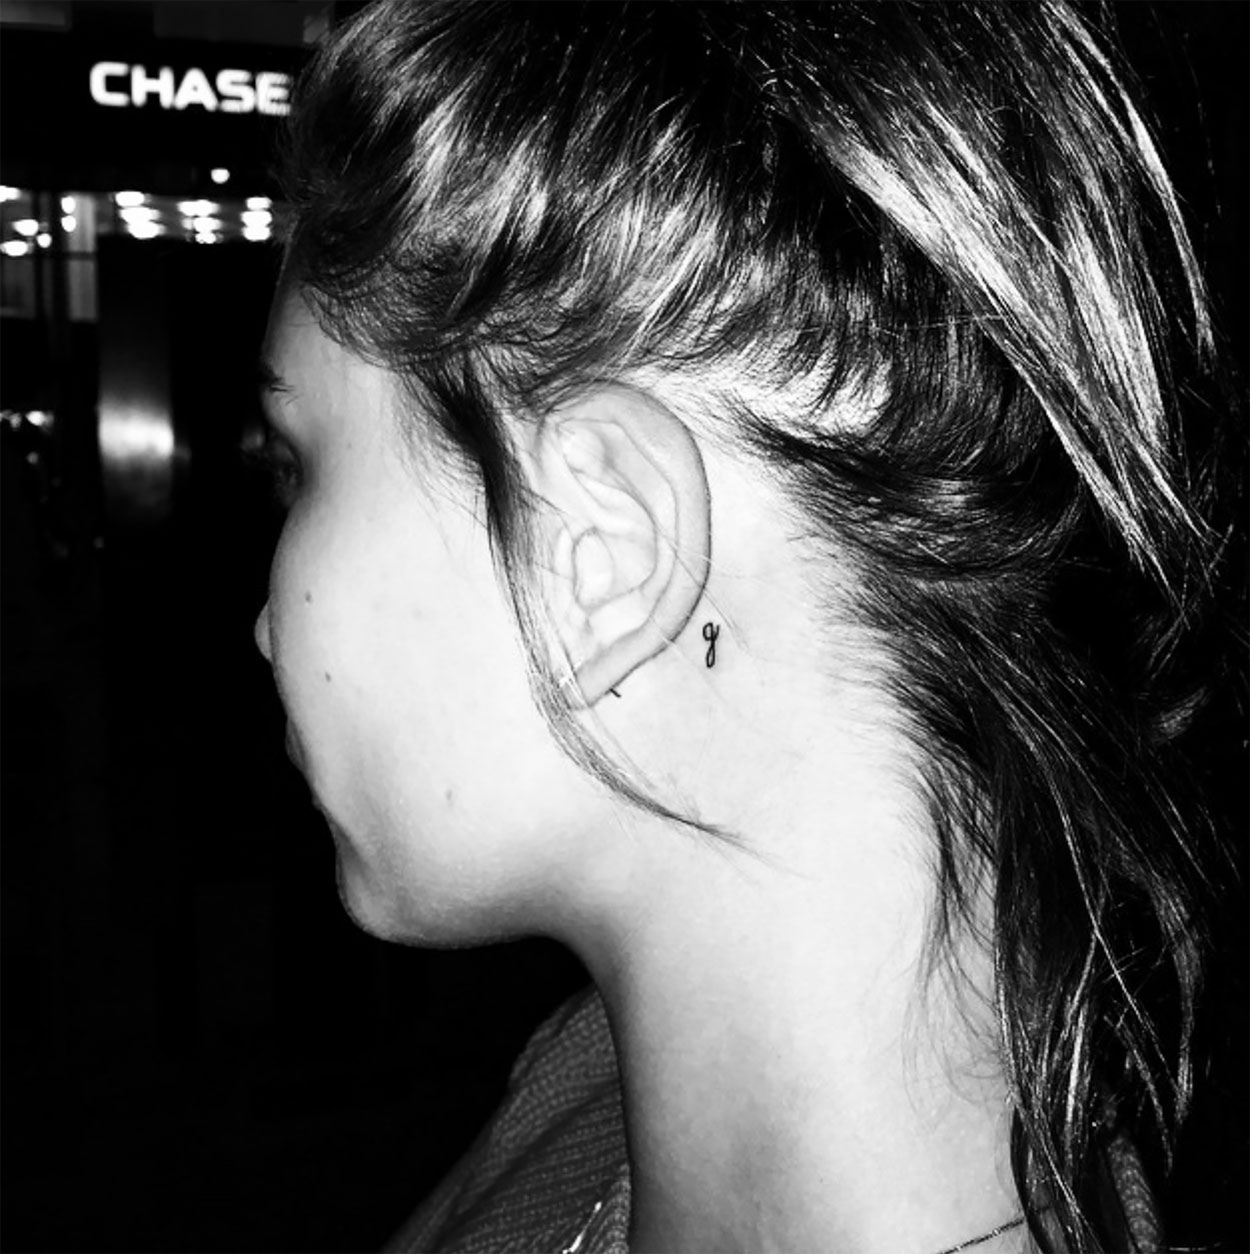 Hailey Biebers Tattoo Artist Gives A Close Look At The Ink Behind Her Ear